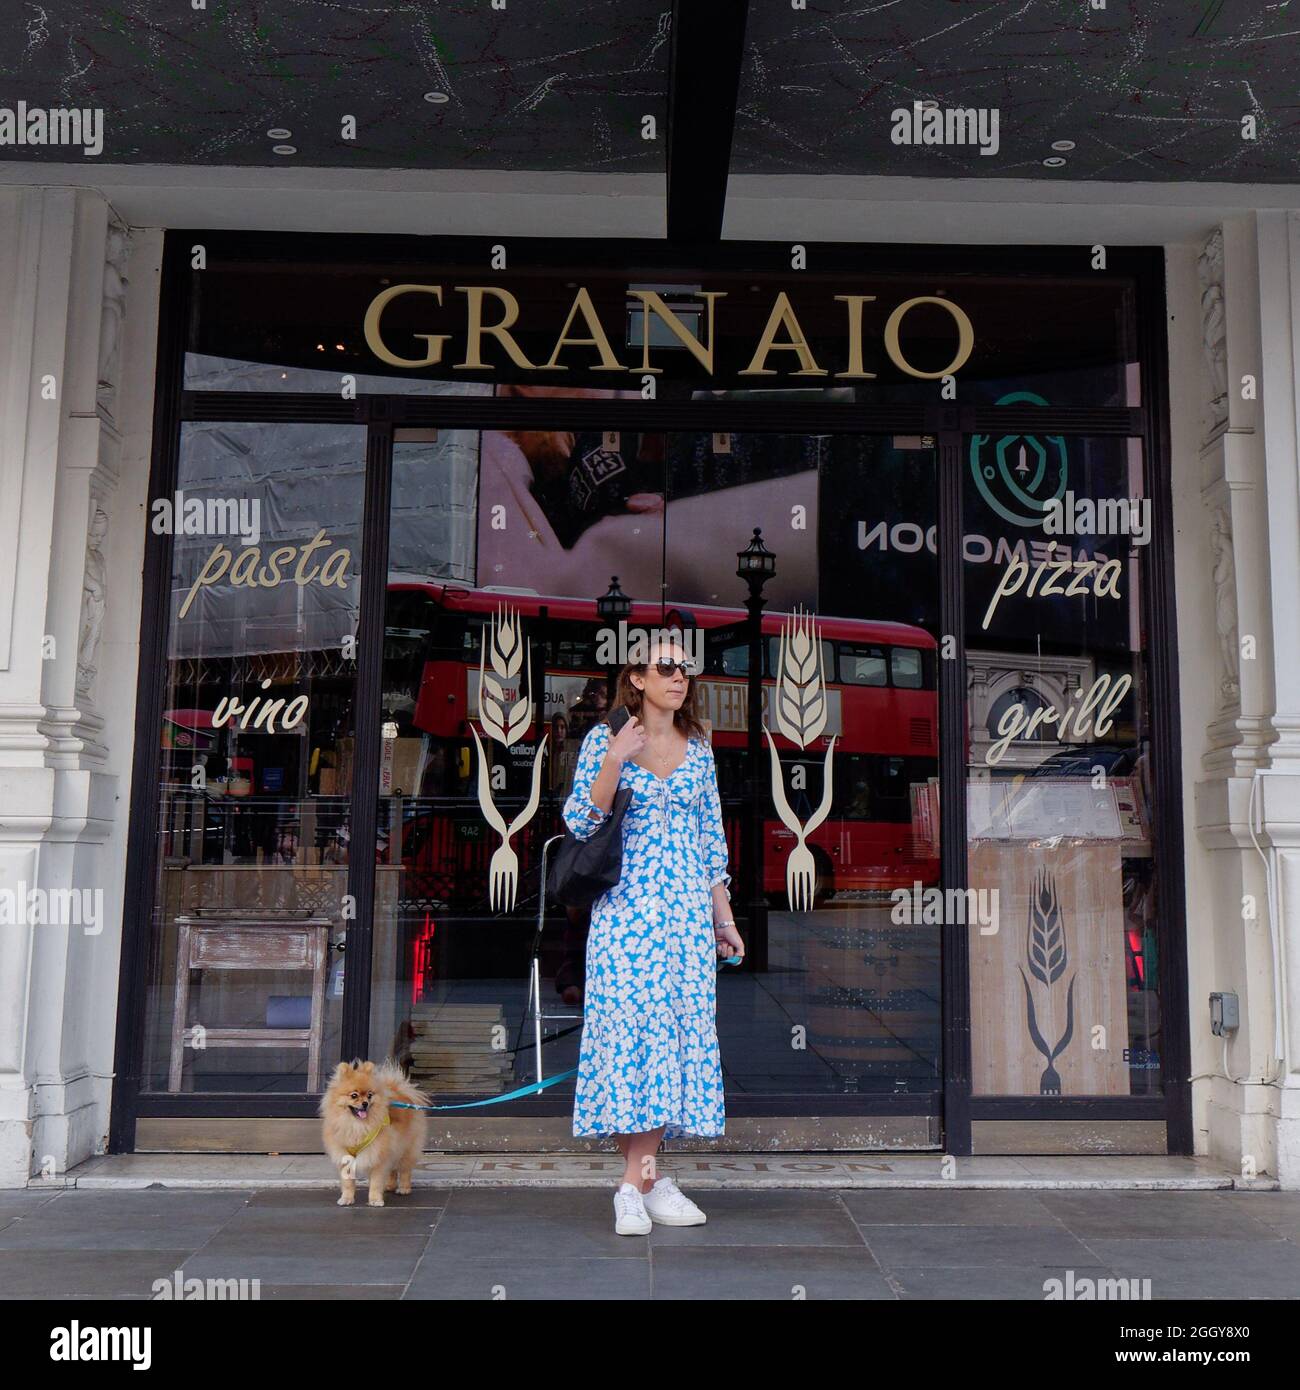 London, Greater London, England, August 24 2021: Woman standing with a dog on a lead in front of a shop in Piccadilly Circus. Stock Photo